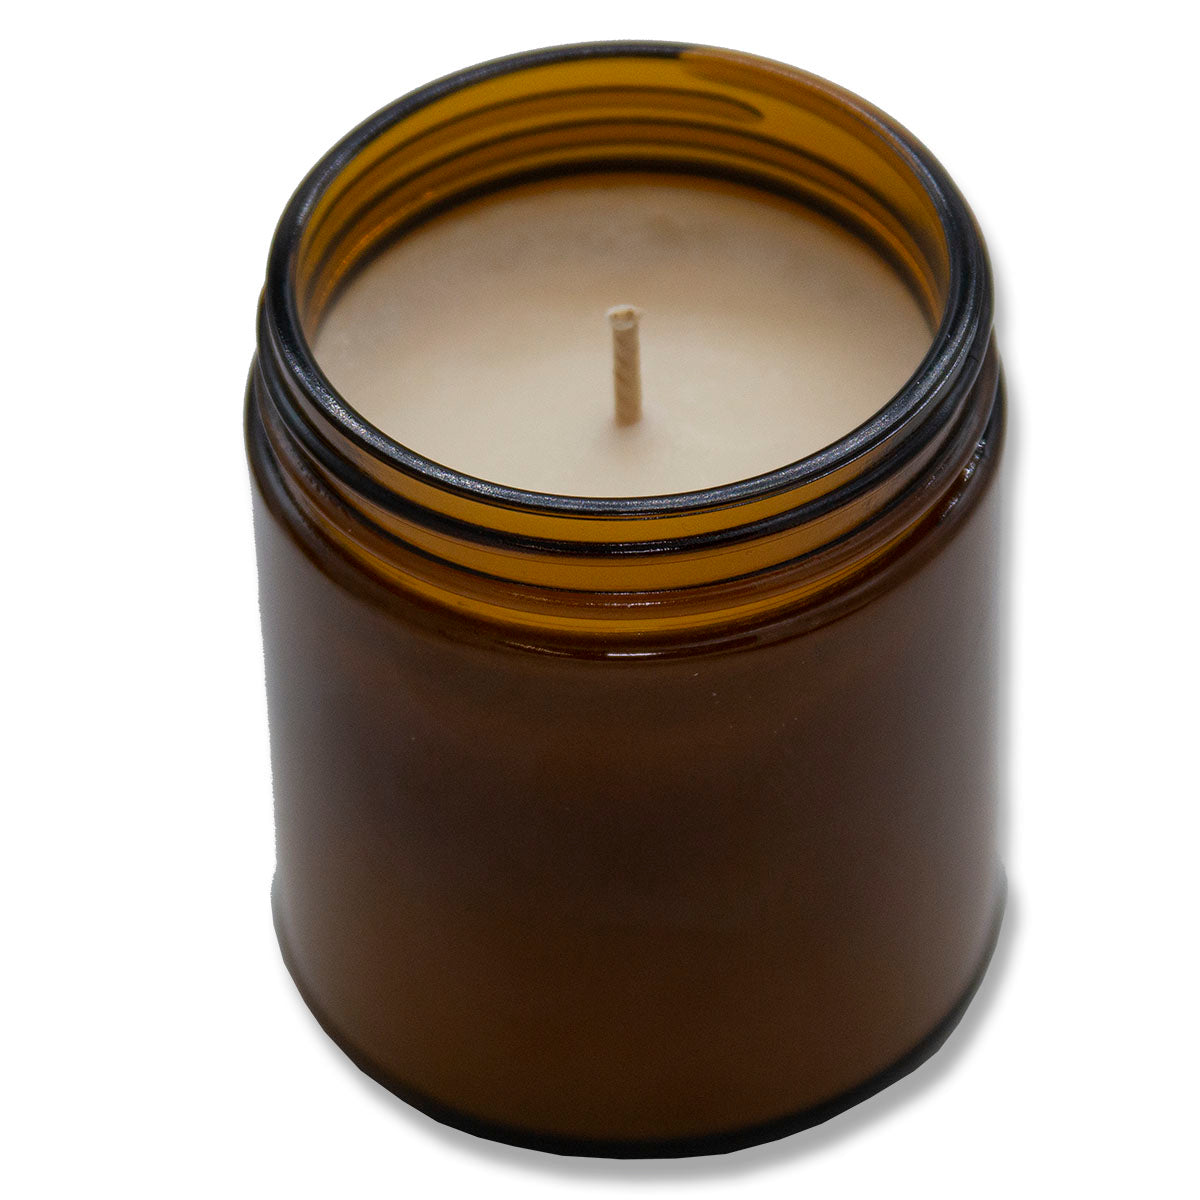 Honeysuckle, Lone Star Candles & More's Premium Hand Poured Strongly Scented Soy Wax Gift Candle, The perfect Spring and Summer-Time Scent, USA Made in Texas, Round Amber Glass Jar 9oz Best Mom